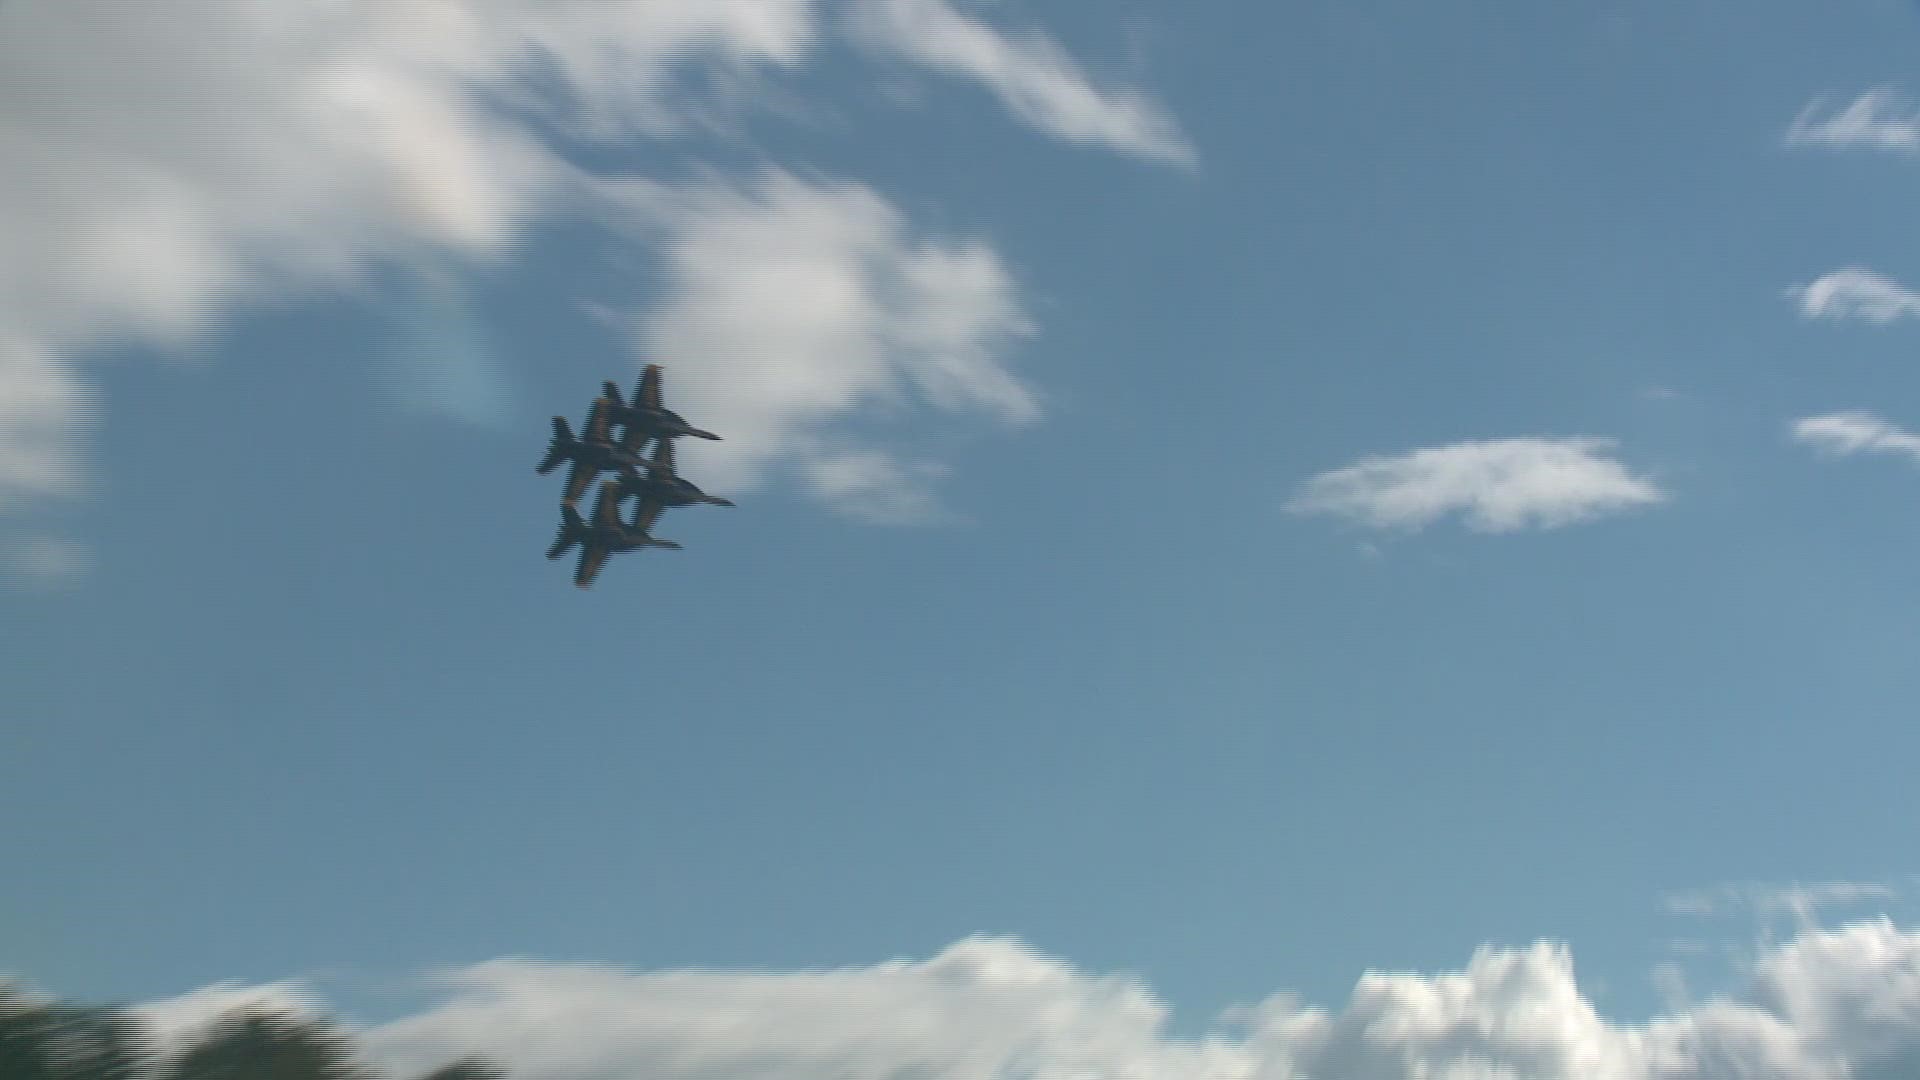 The Blue Angels are getting ready for the Maine Air Show this weekend